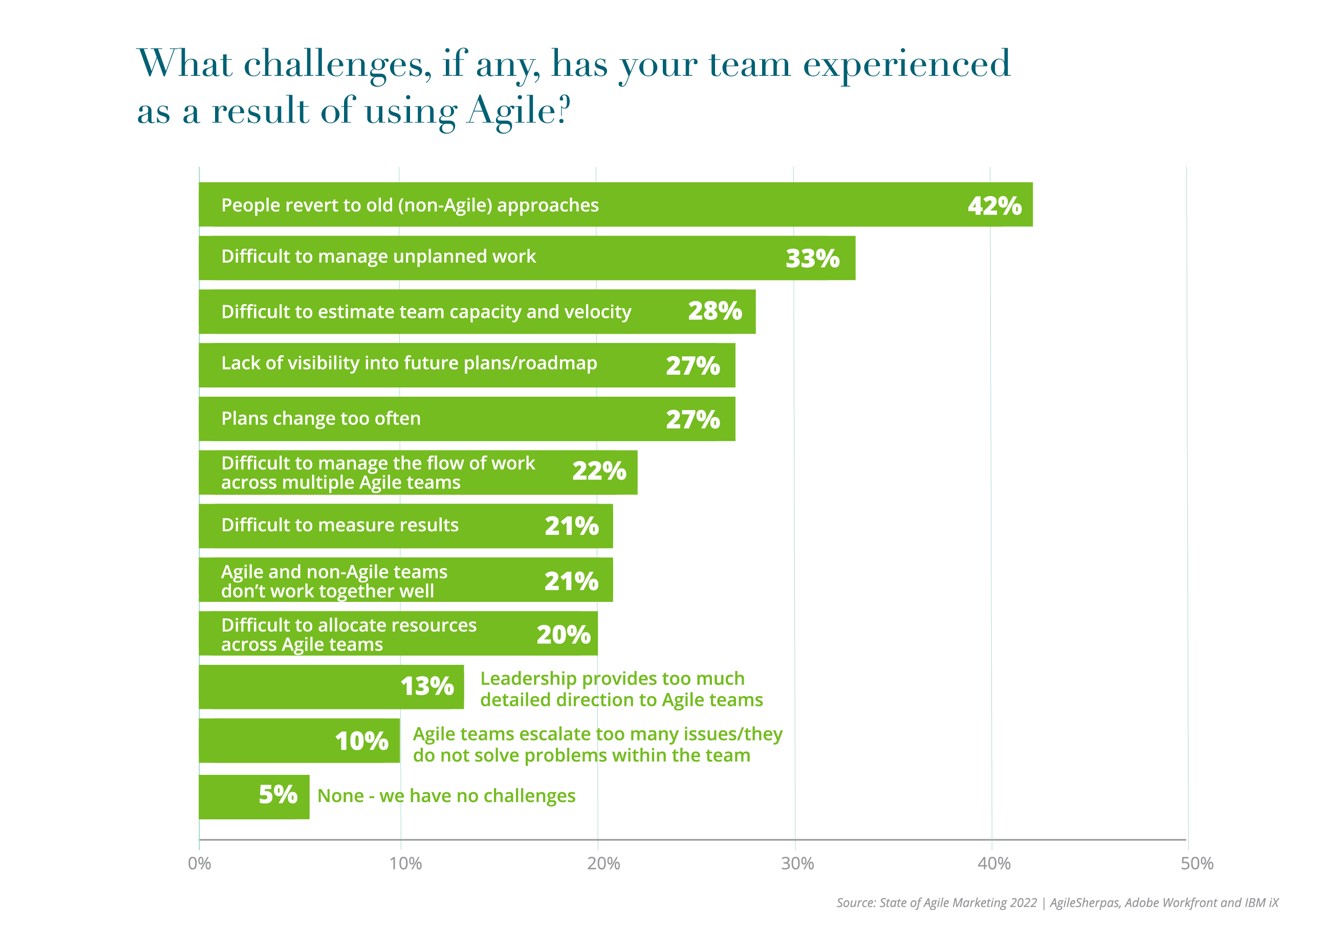 Annual State of Agile Marketing Report 2022 What challenges, if any, has your team experience as a result of using agile?